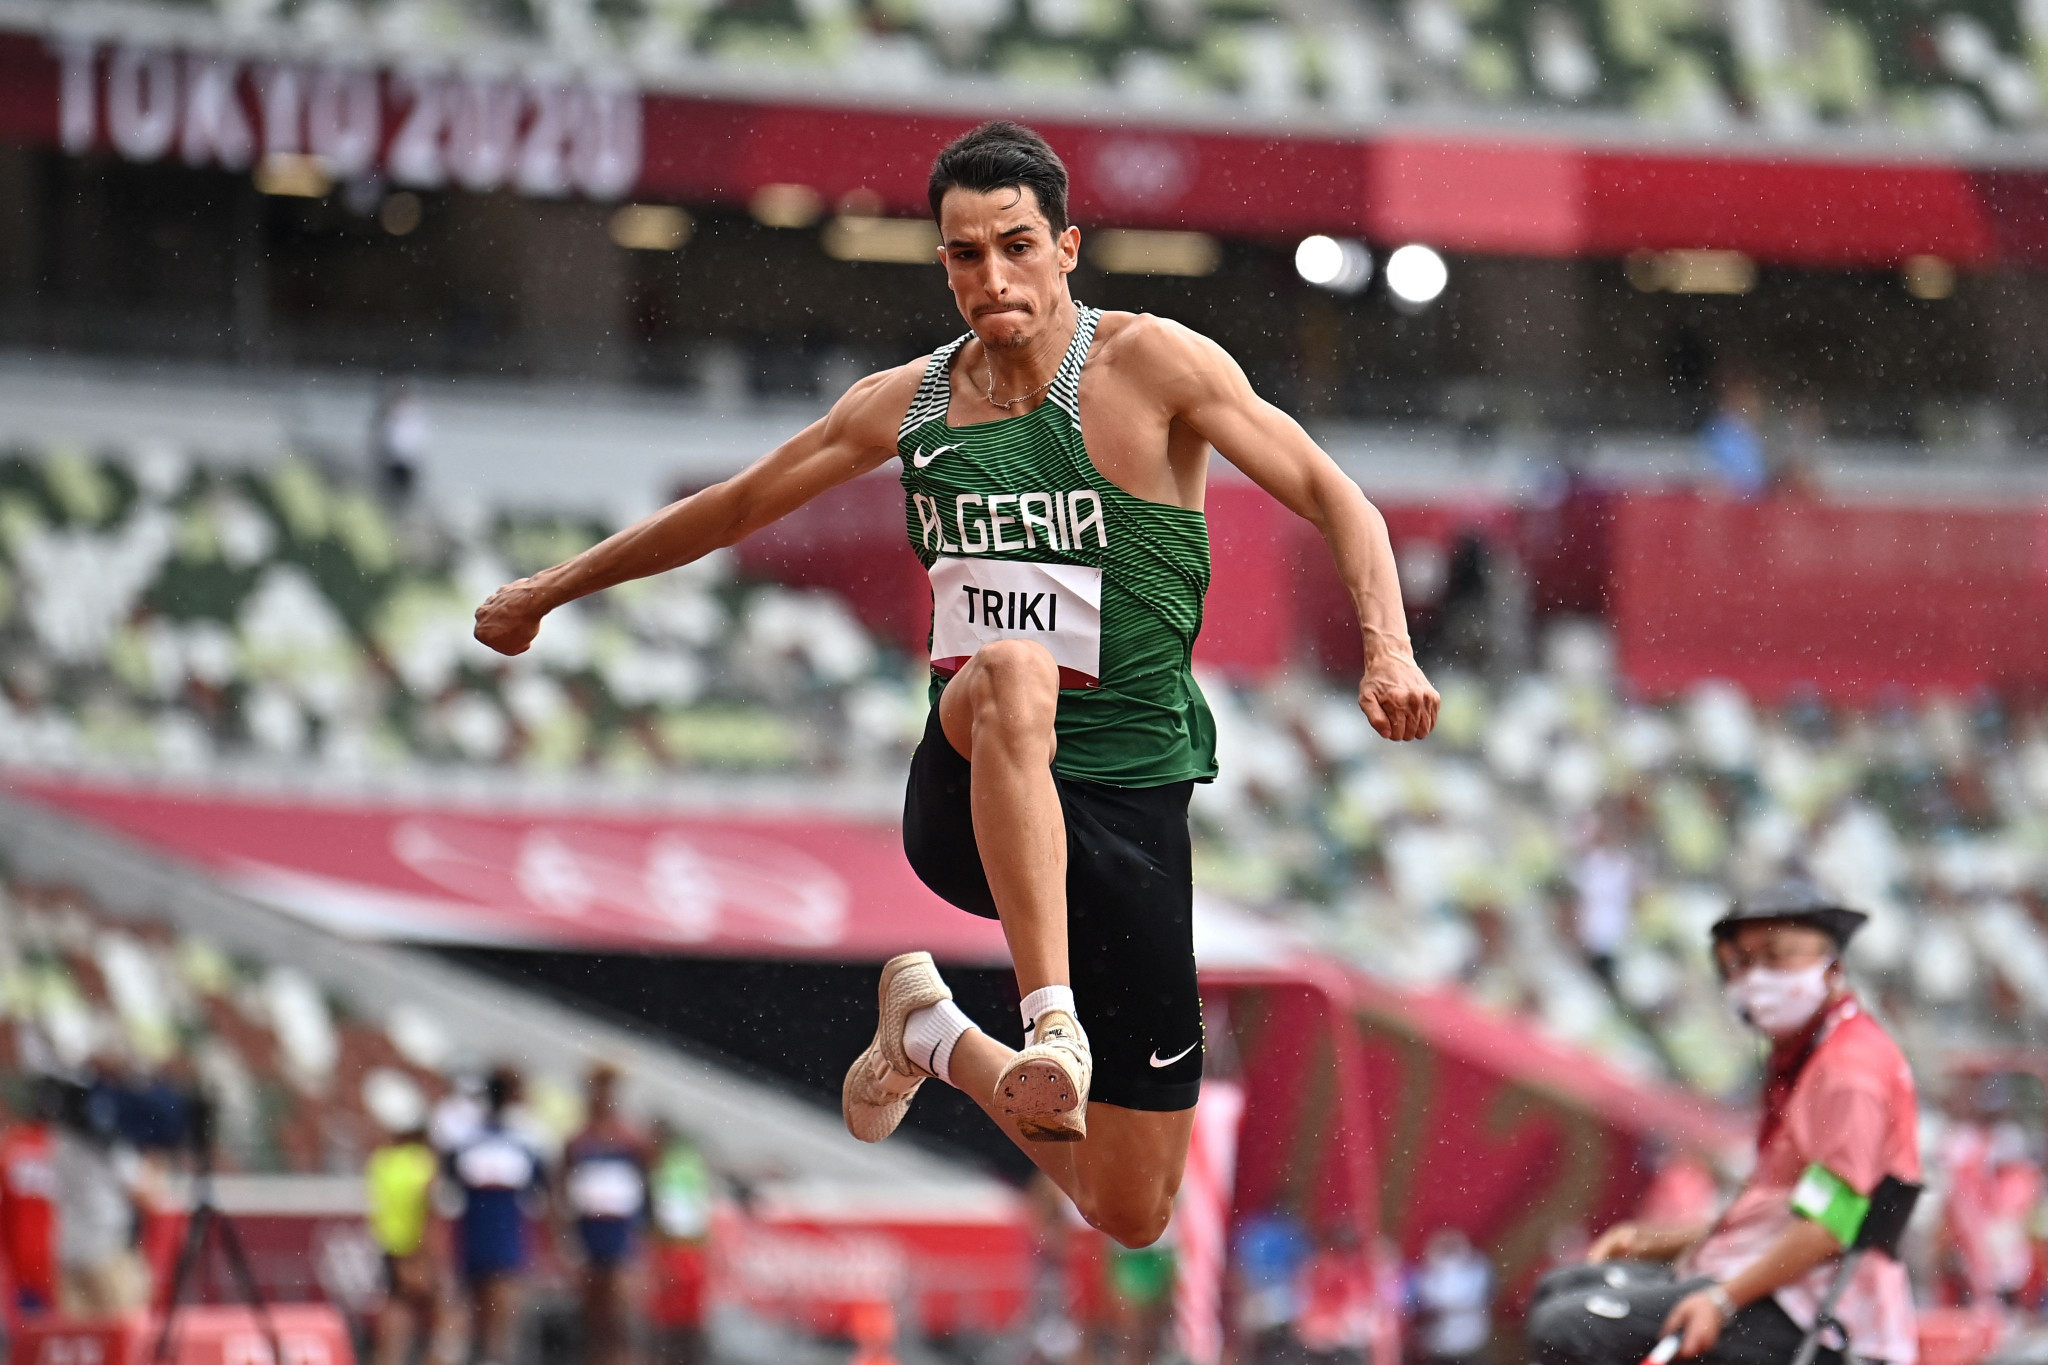 Yasser Triki's fifth place in the men's triple jump was Algeria's best result at the Tokyo 2020 Olympics ©Getty Images